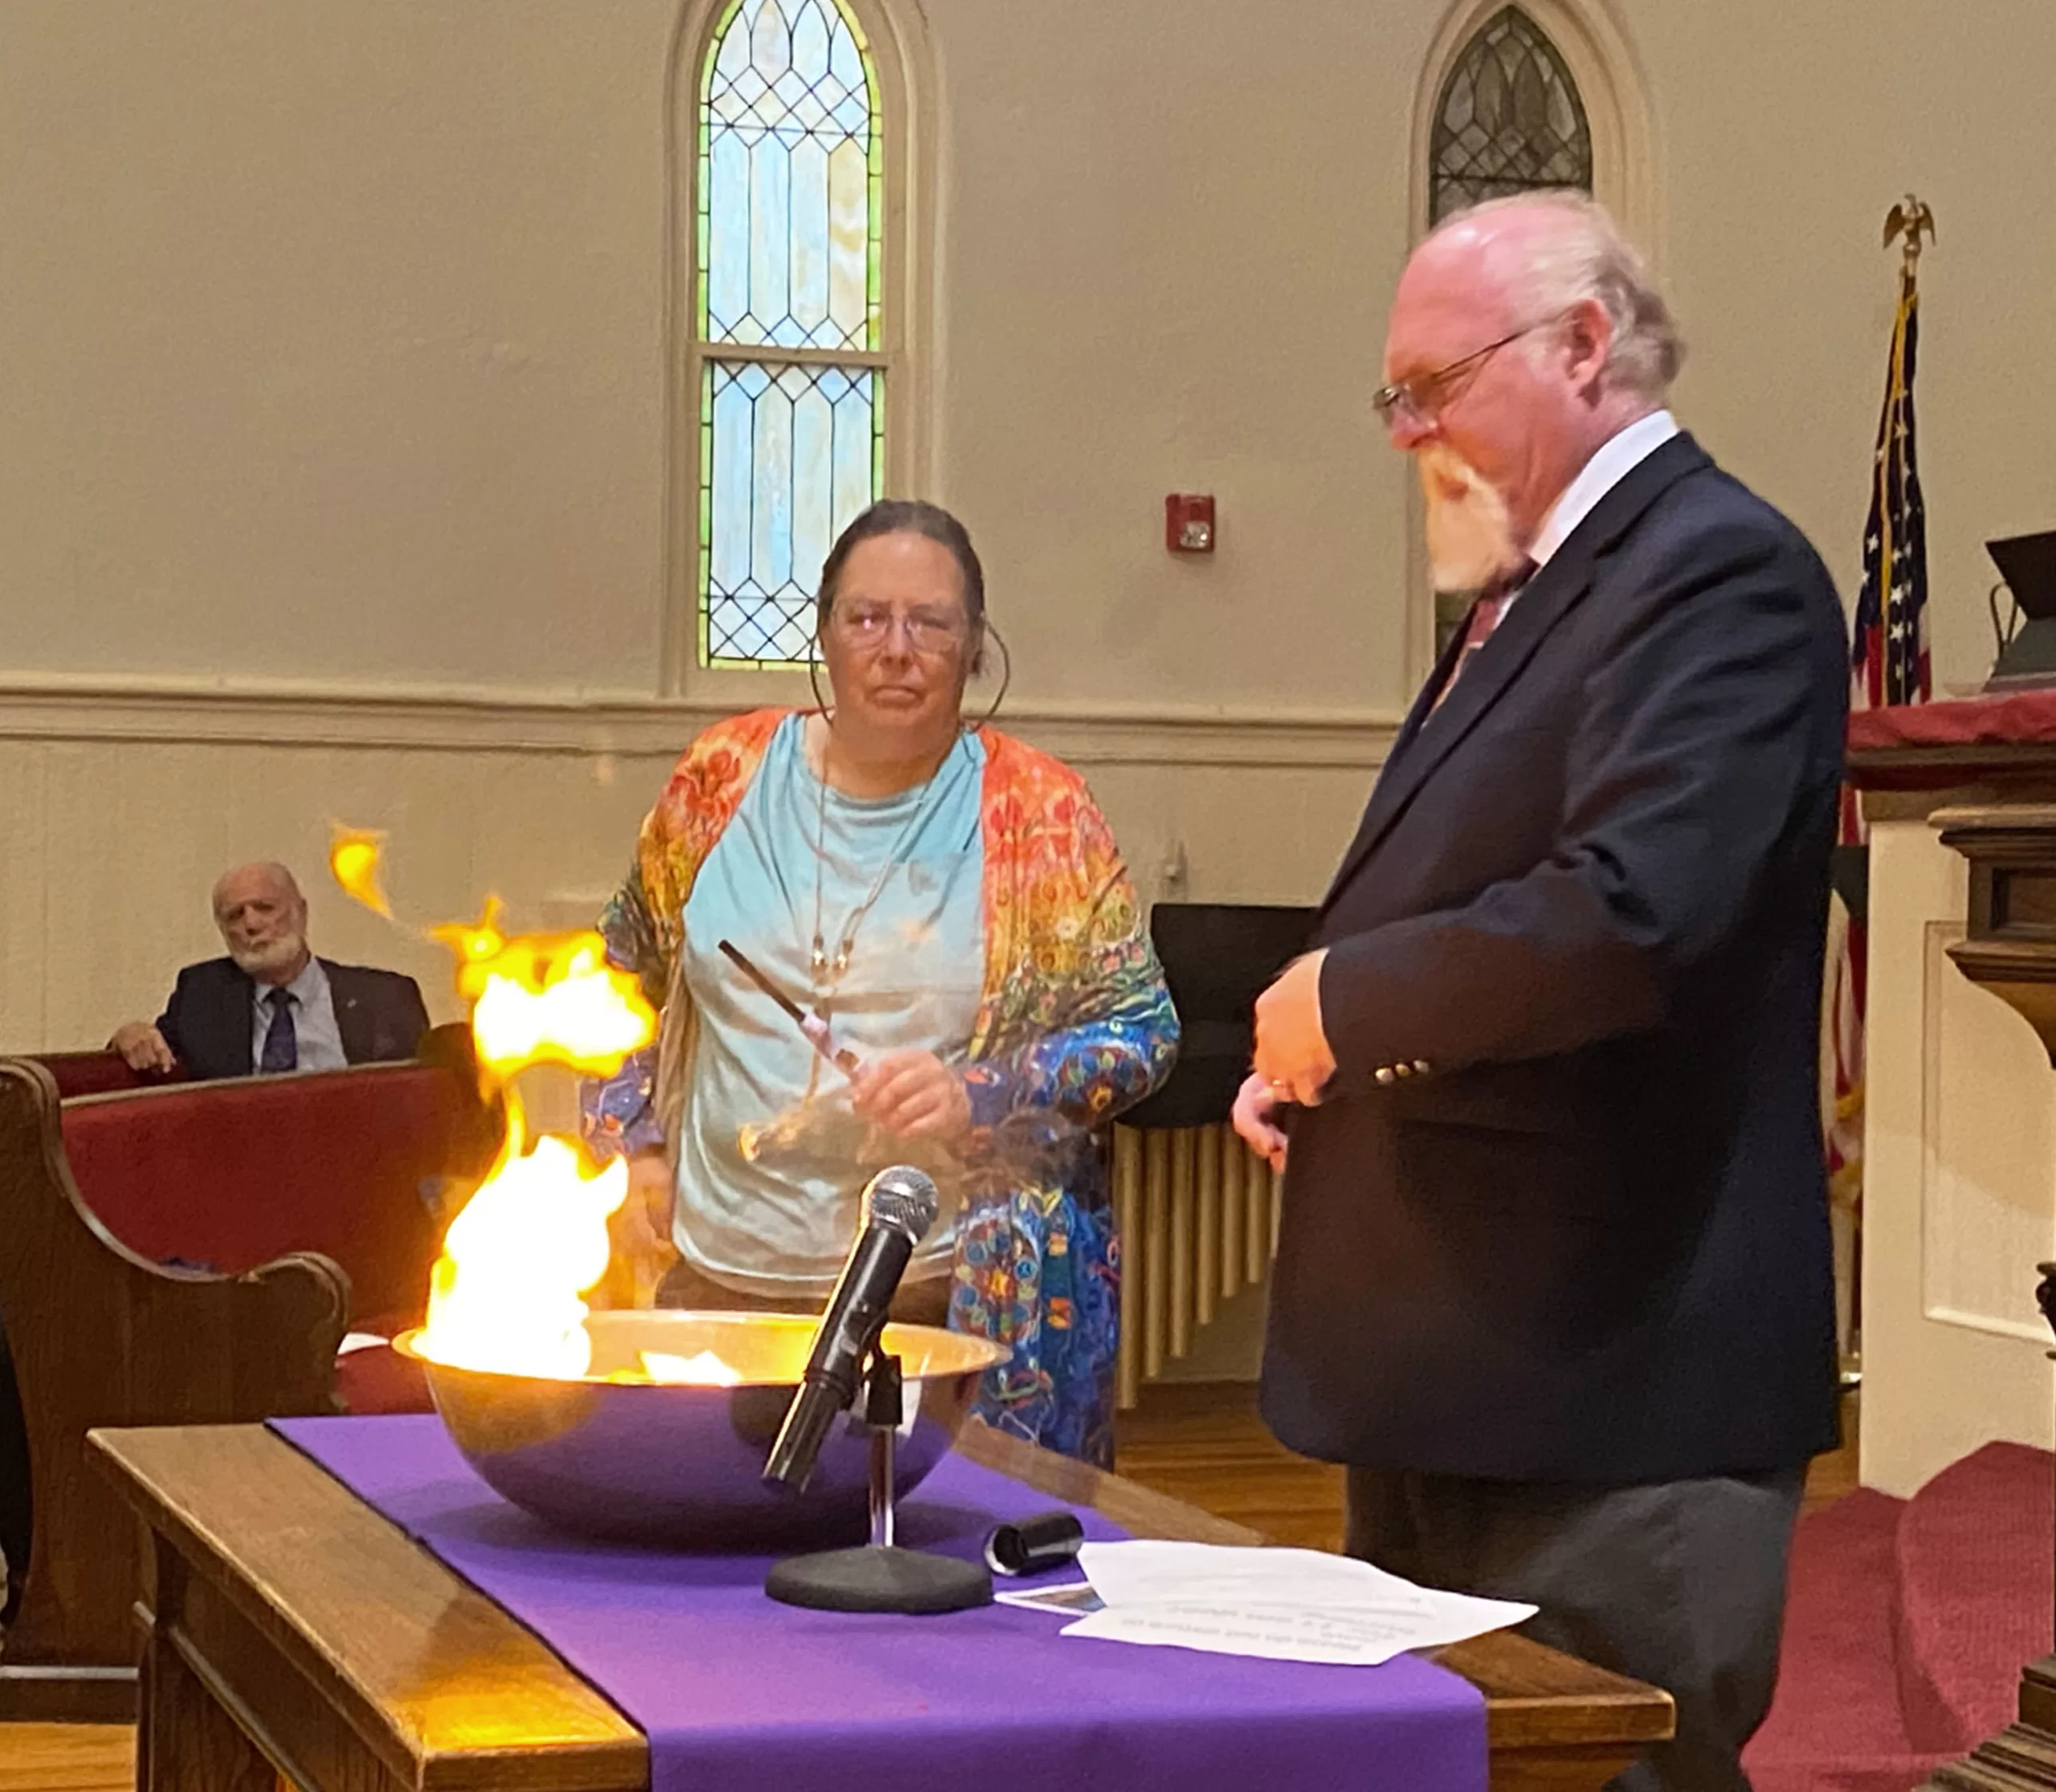 The Rev. John Jackman symbolically burn the medical debt of thousands of families